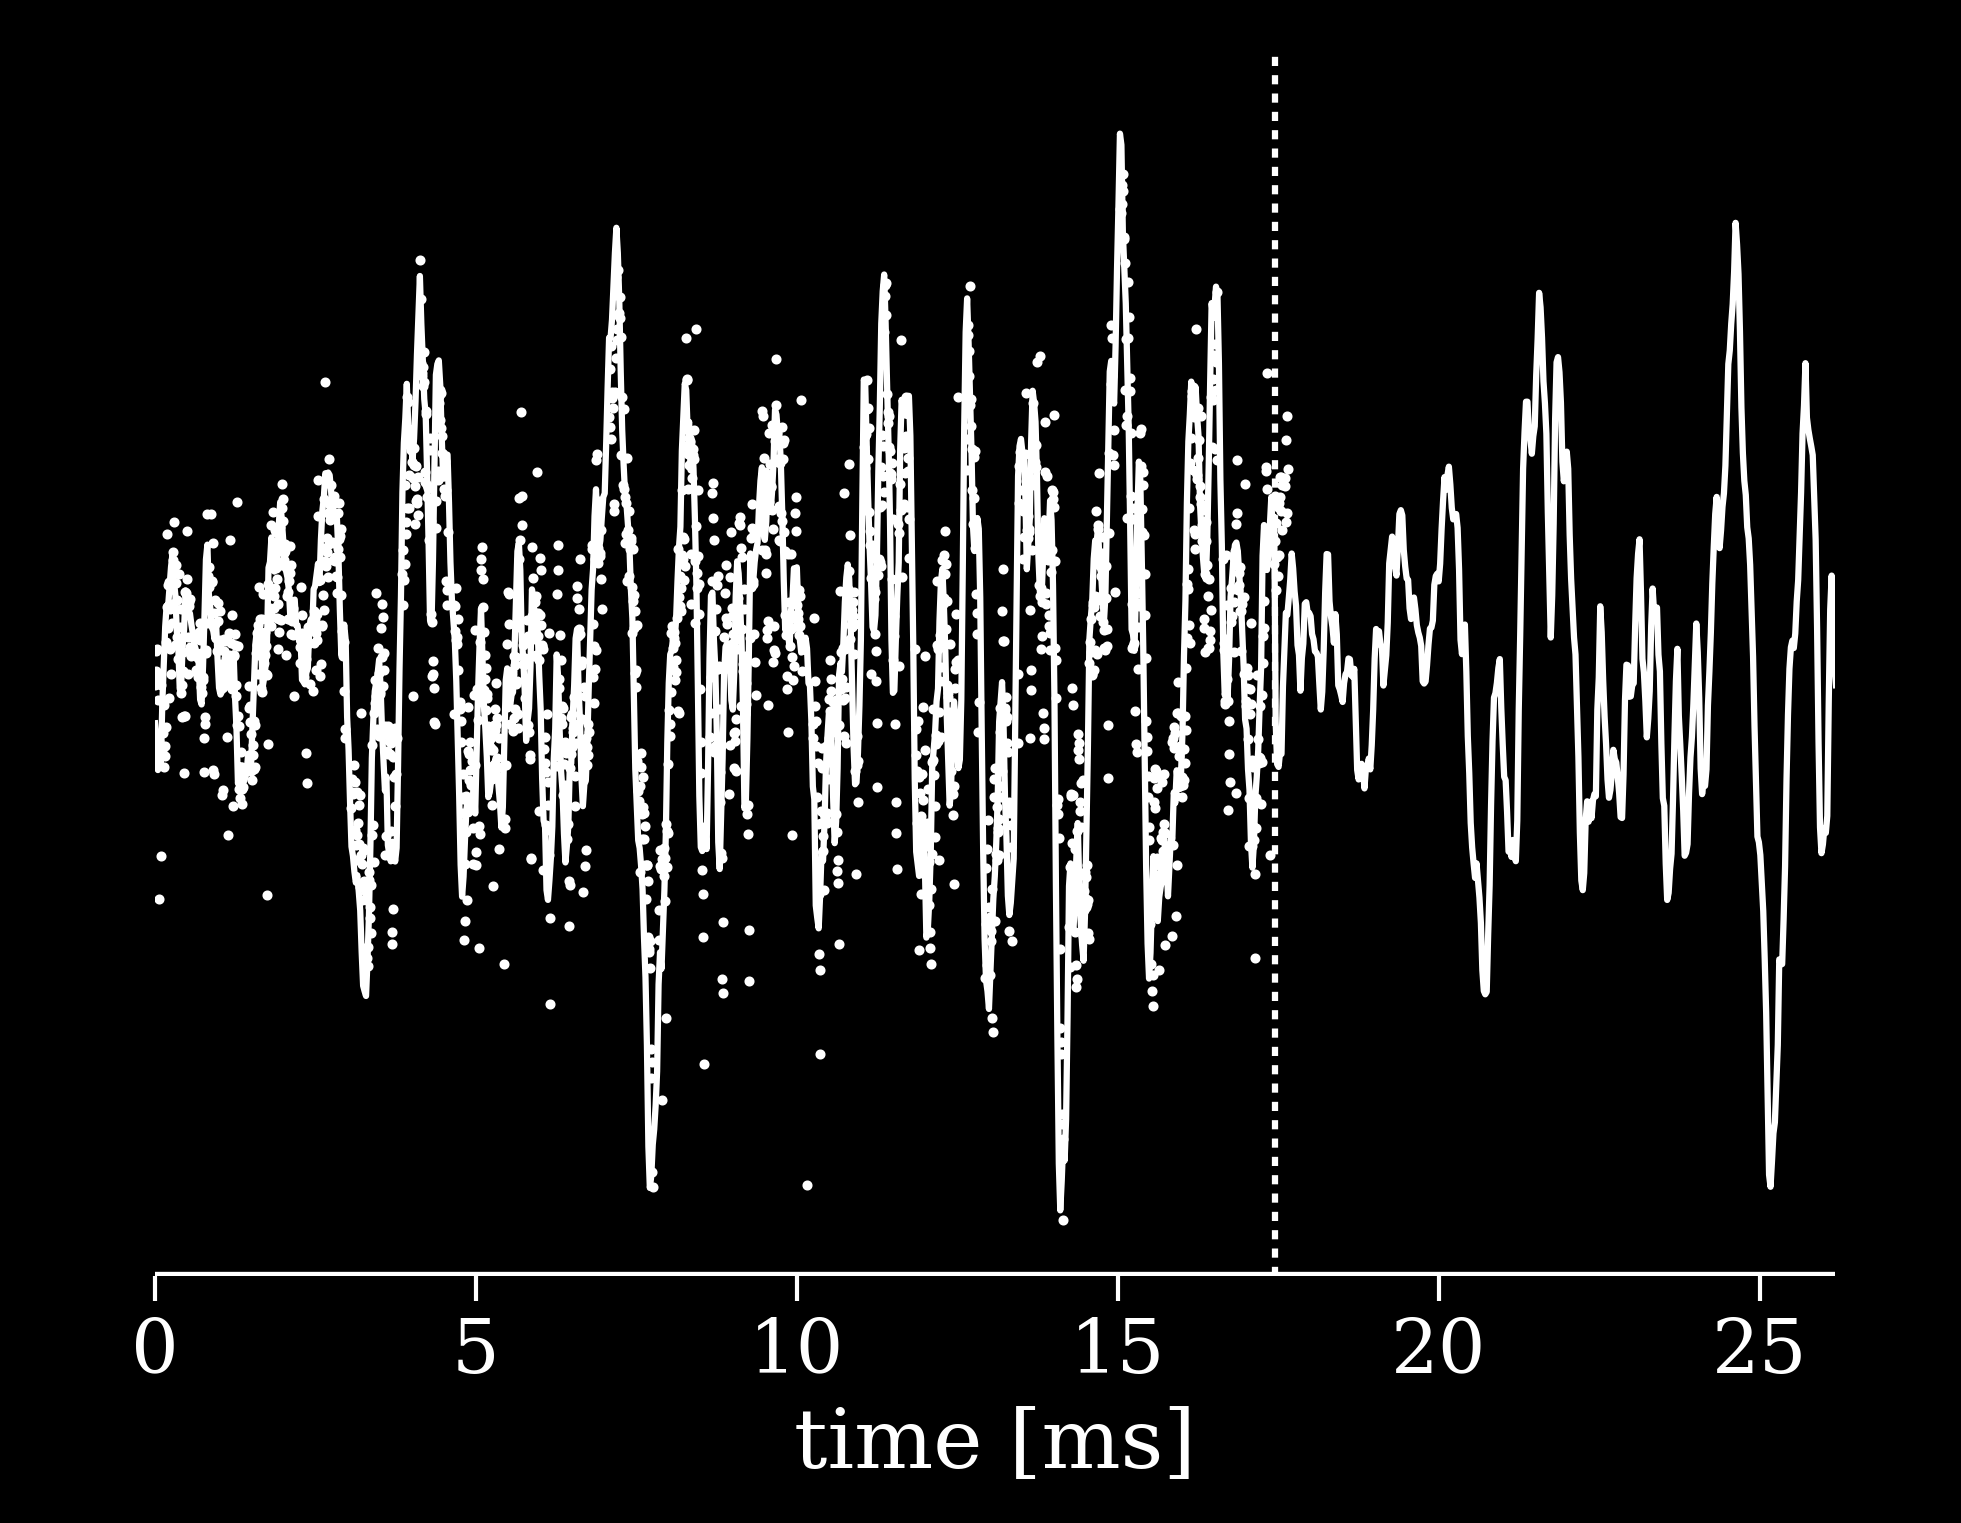 Light curve data of the star TRAPPIST-1a sped up by the same amount that the planets' orbits were sped up to generate audible notes. The ~40 days of data takes about 17.5 ms before it is repeated.